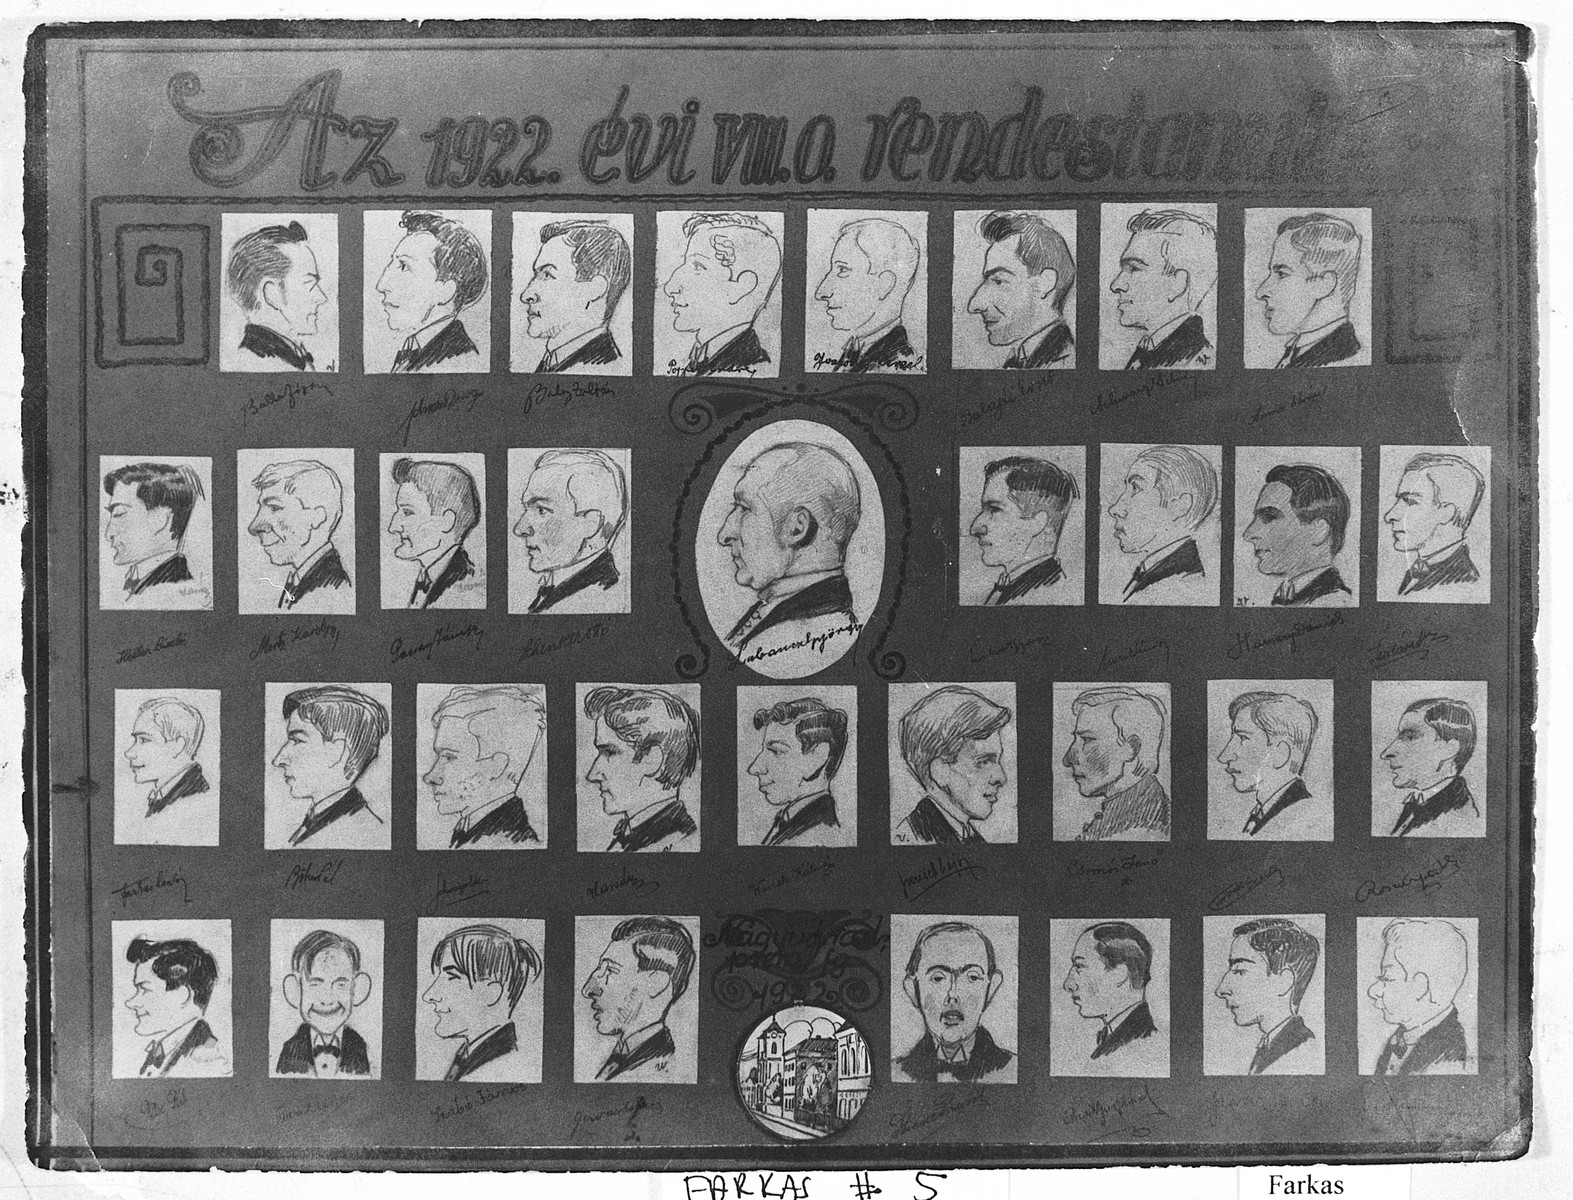 Caricature of the graduating class of the Oradea Gymnasium drawn by a student, Kalman Wavrek.

The school was directed by the Premonstratensian Order founded in France, but many of the students were Jewish.